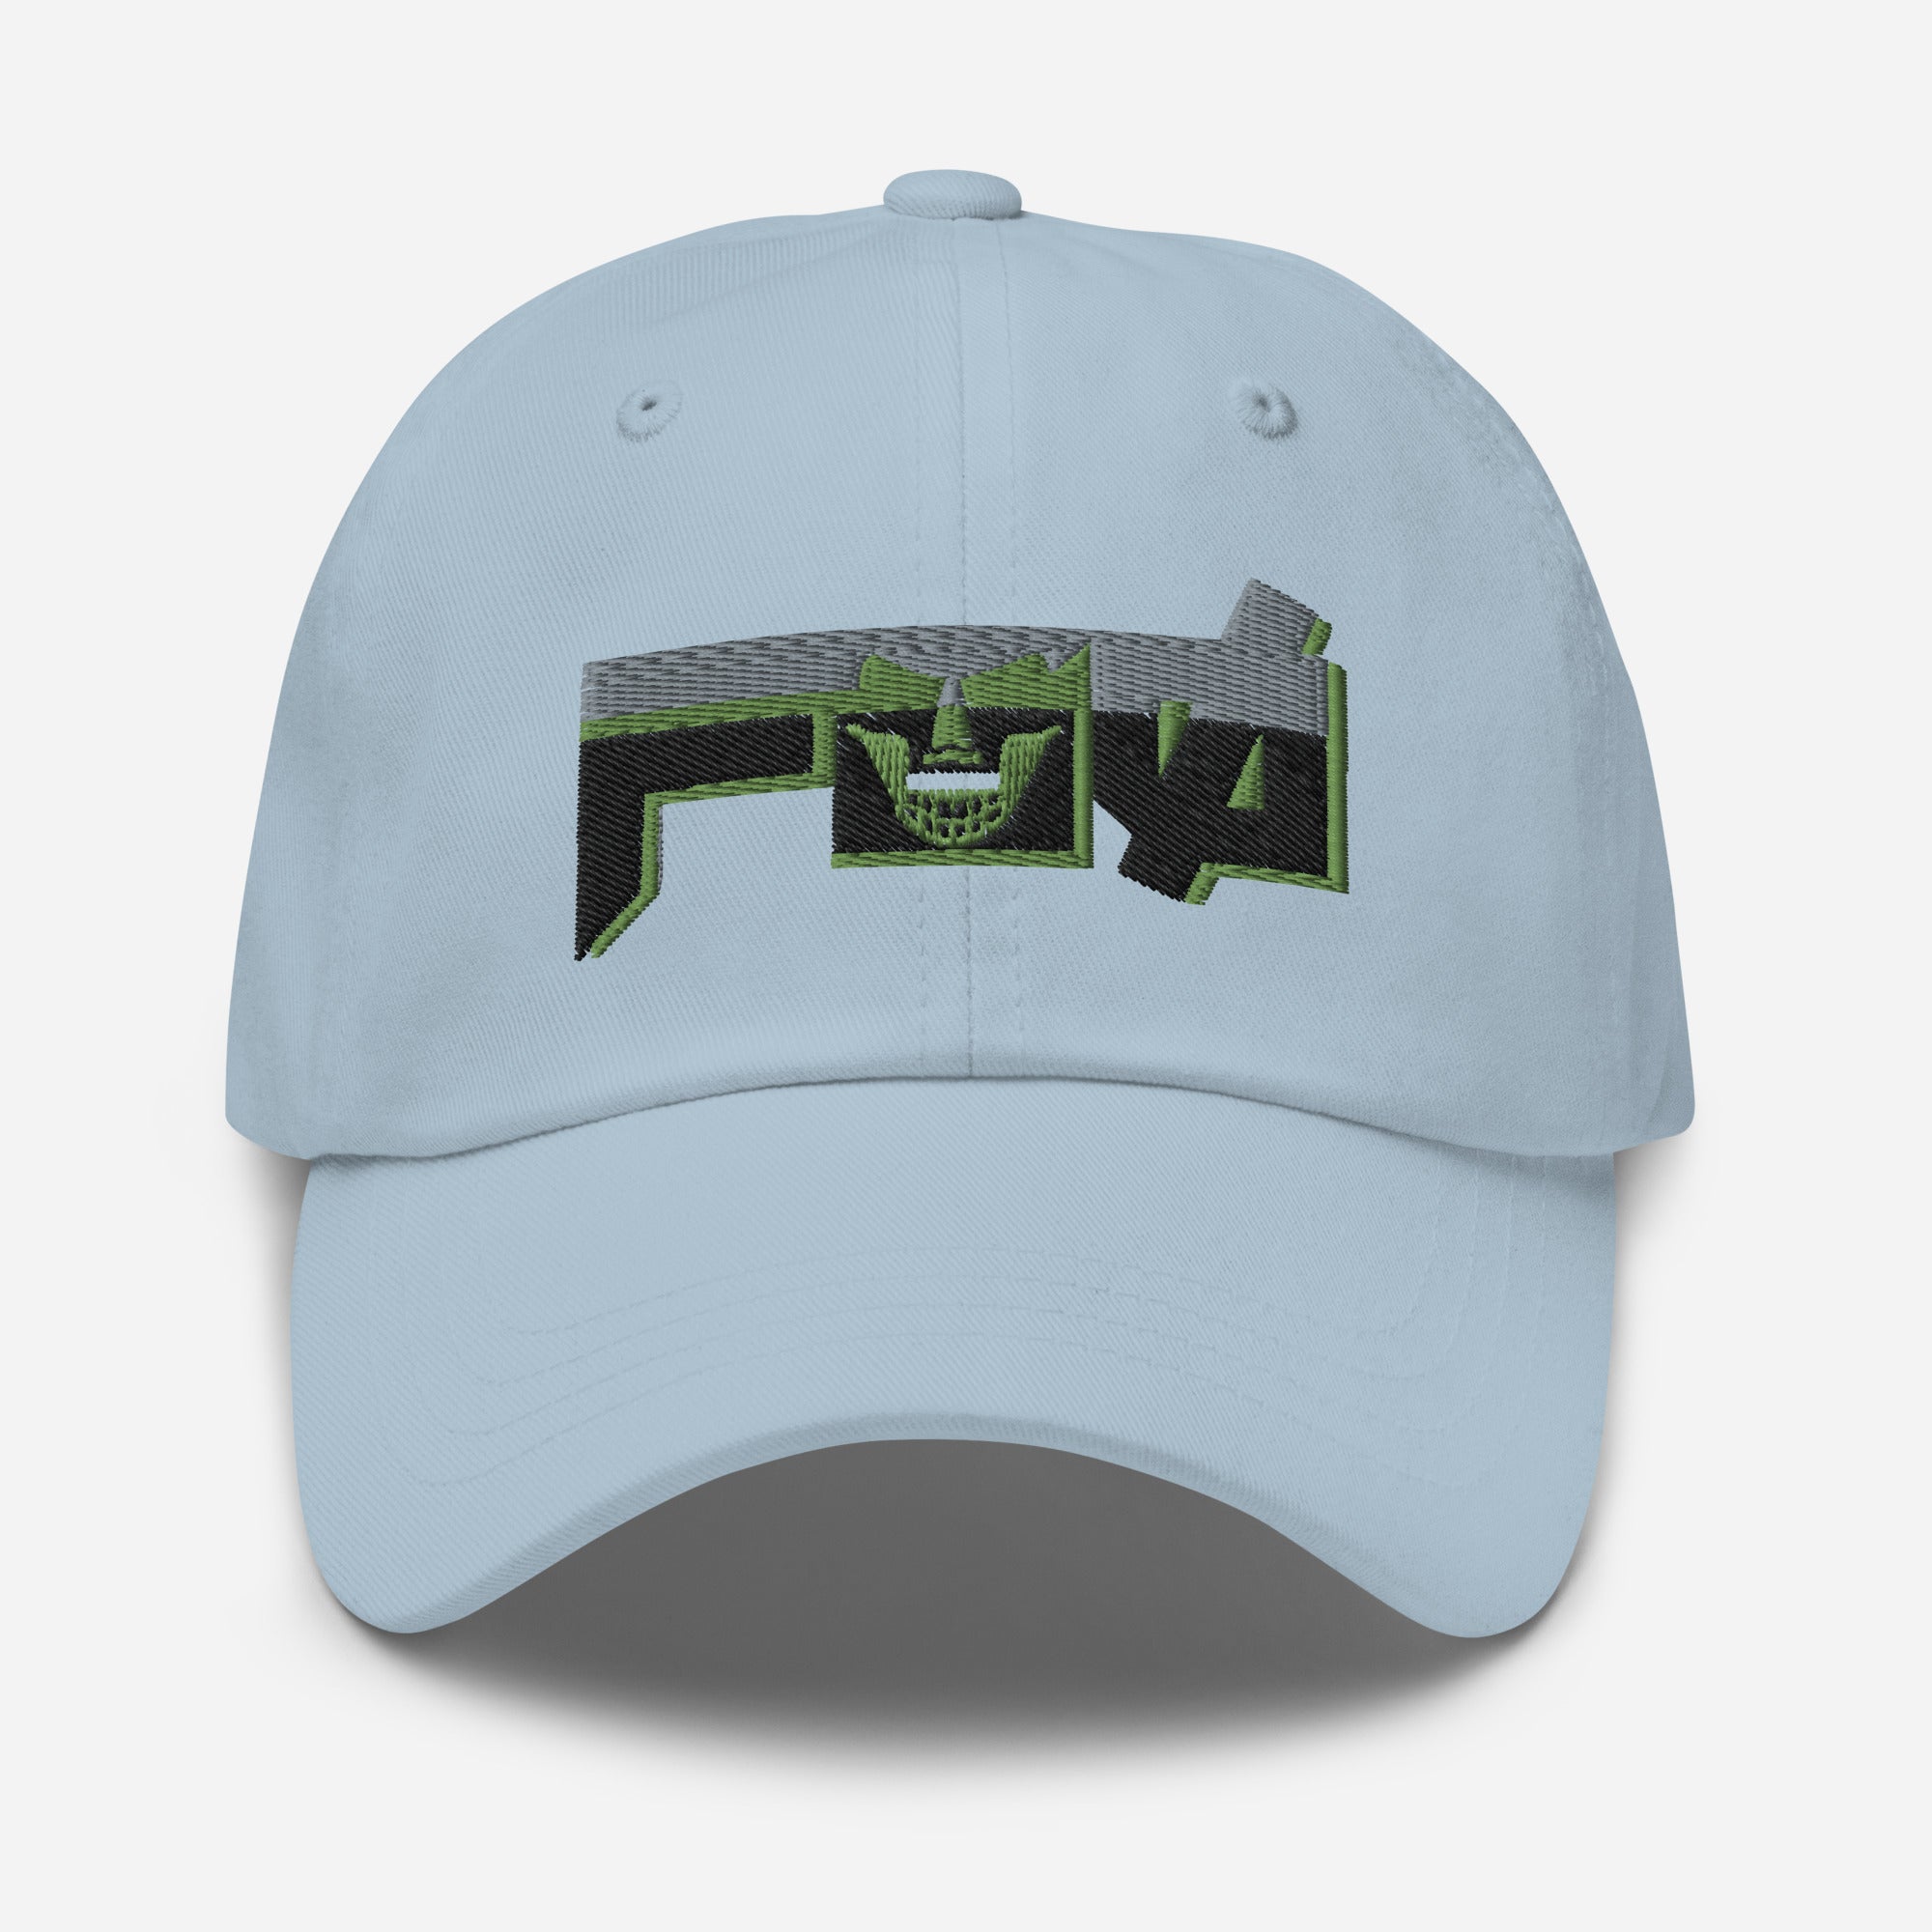 fbo2 EMBROIDERED DAD HAT